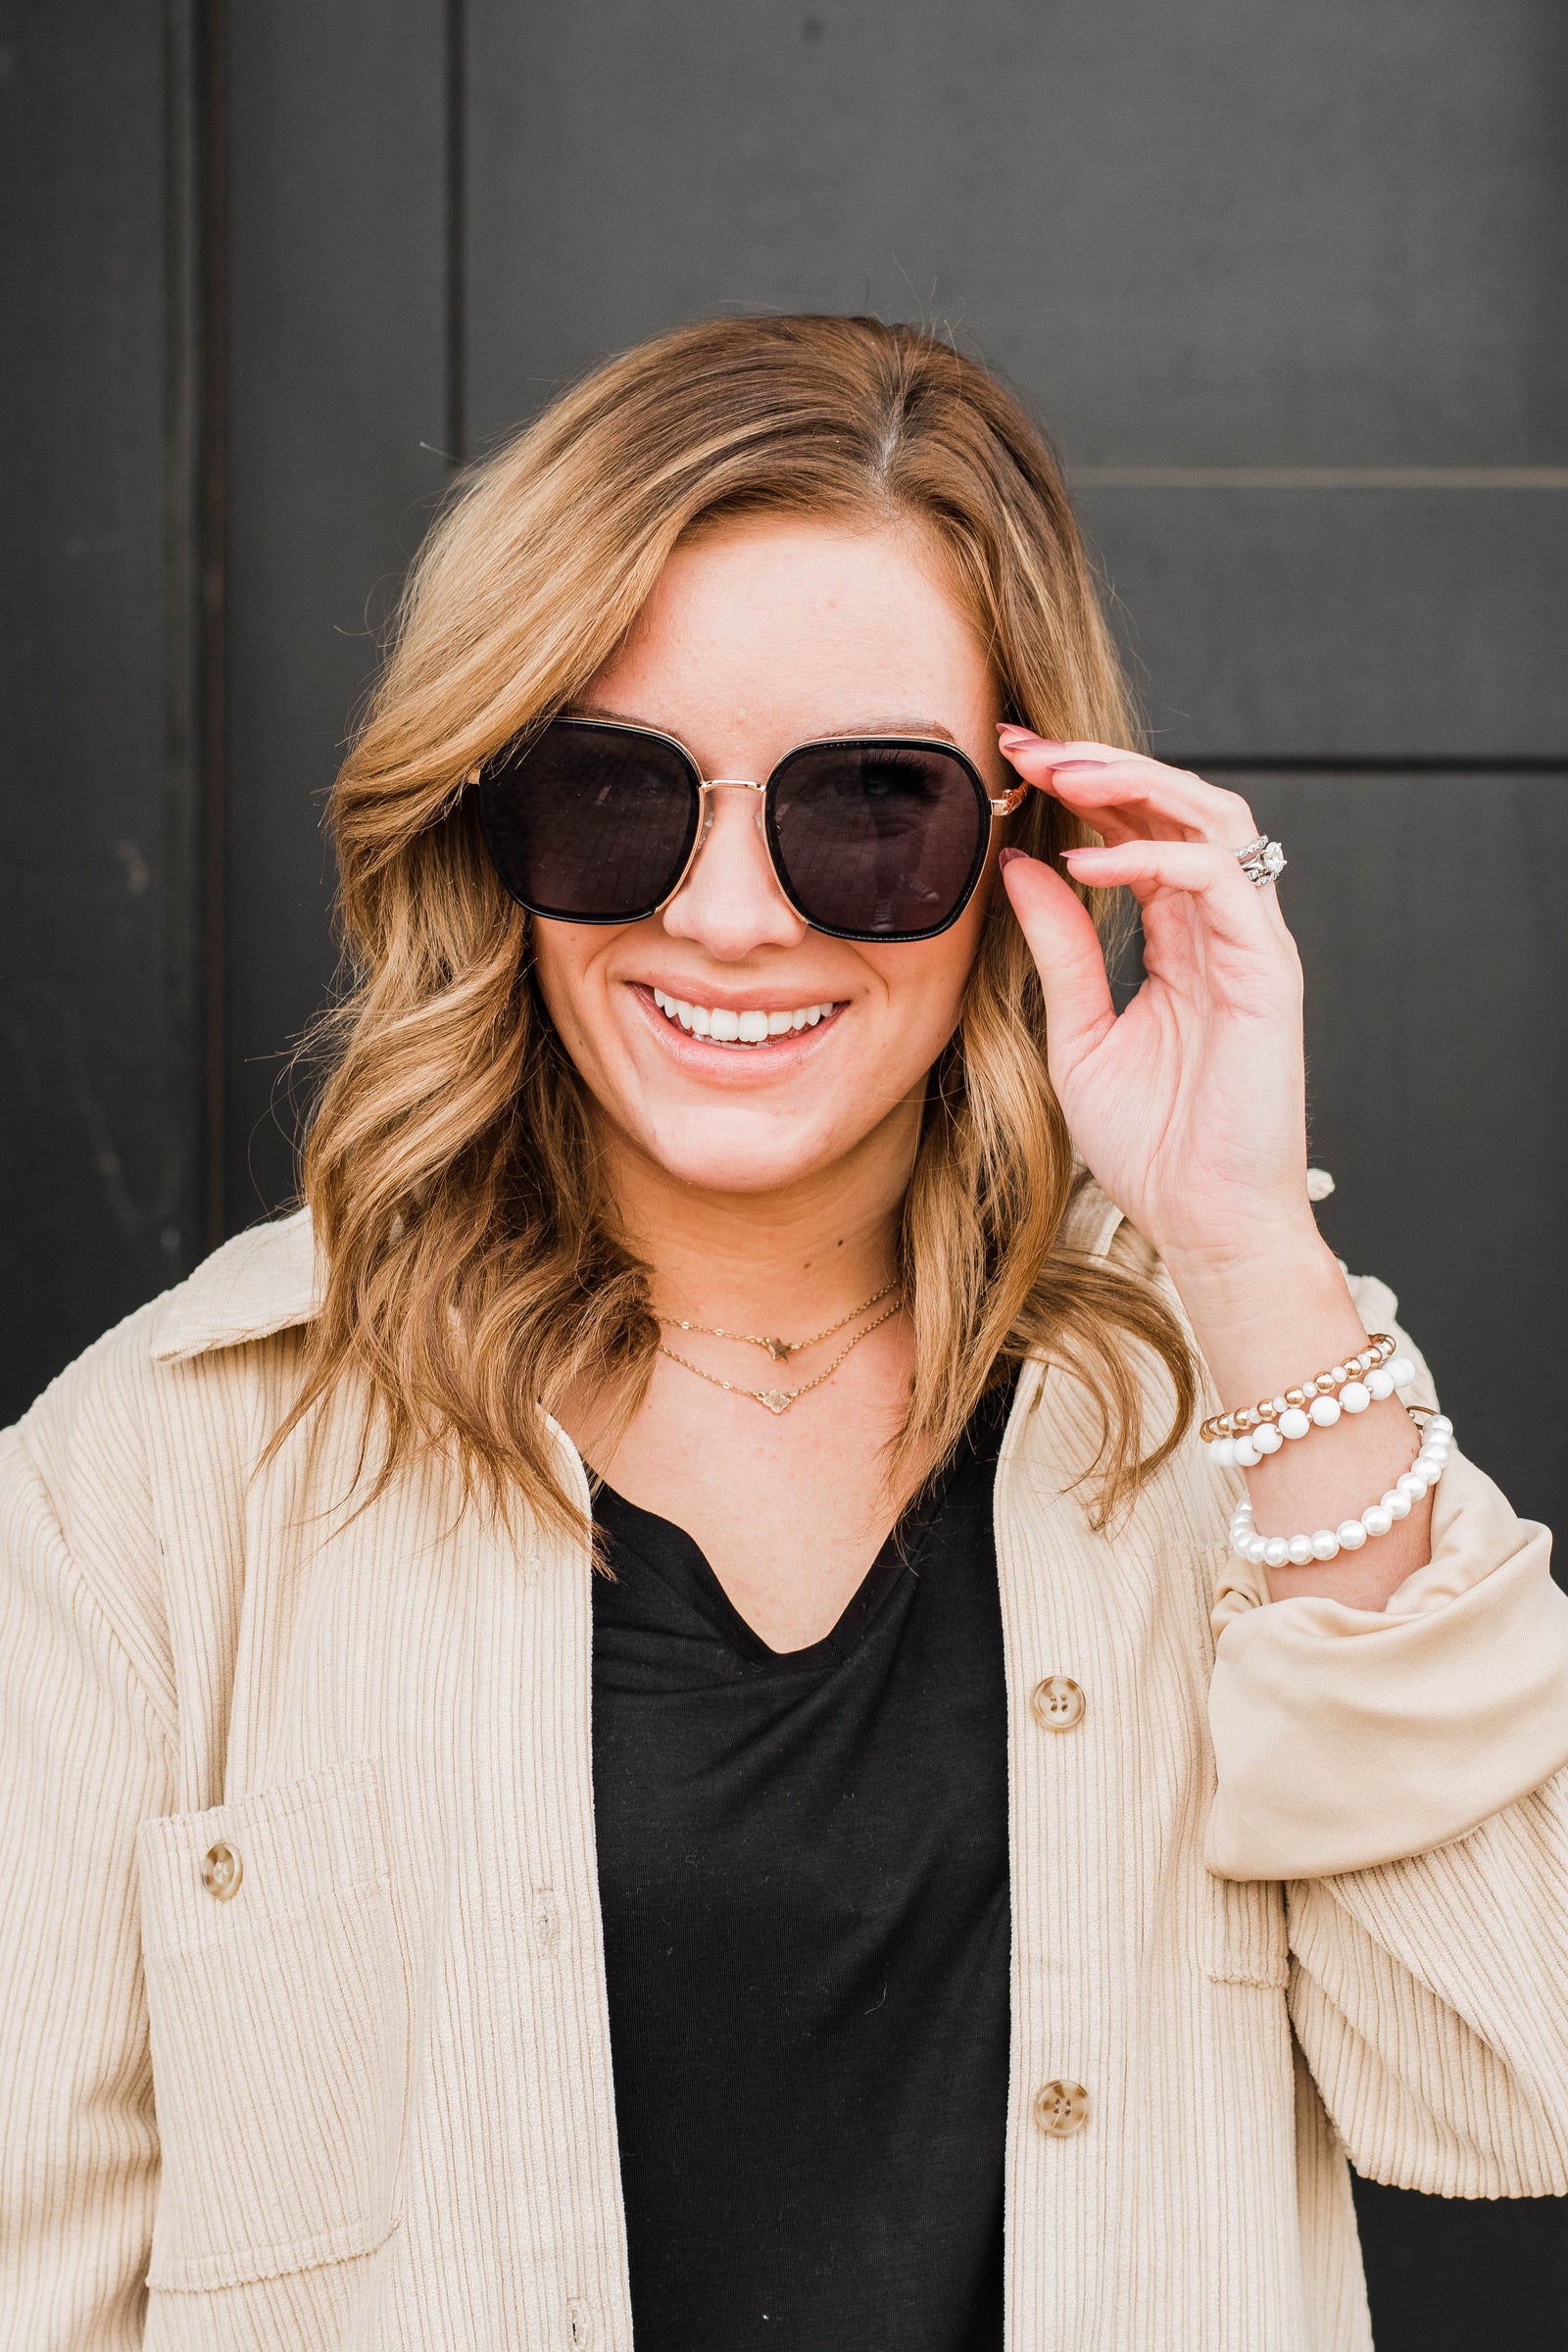 Block Out The Haters Aviator Sunglasses